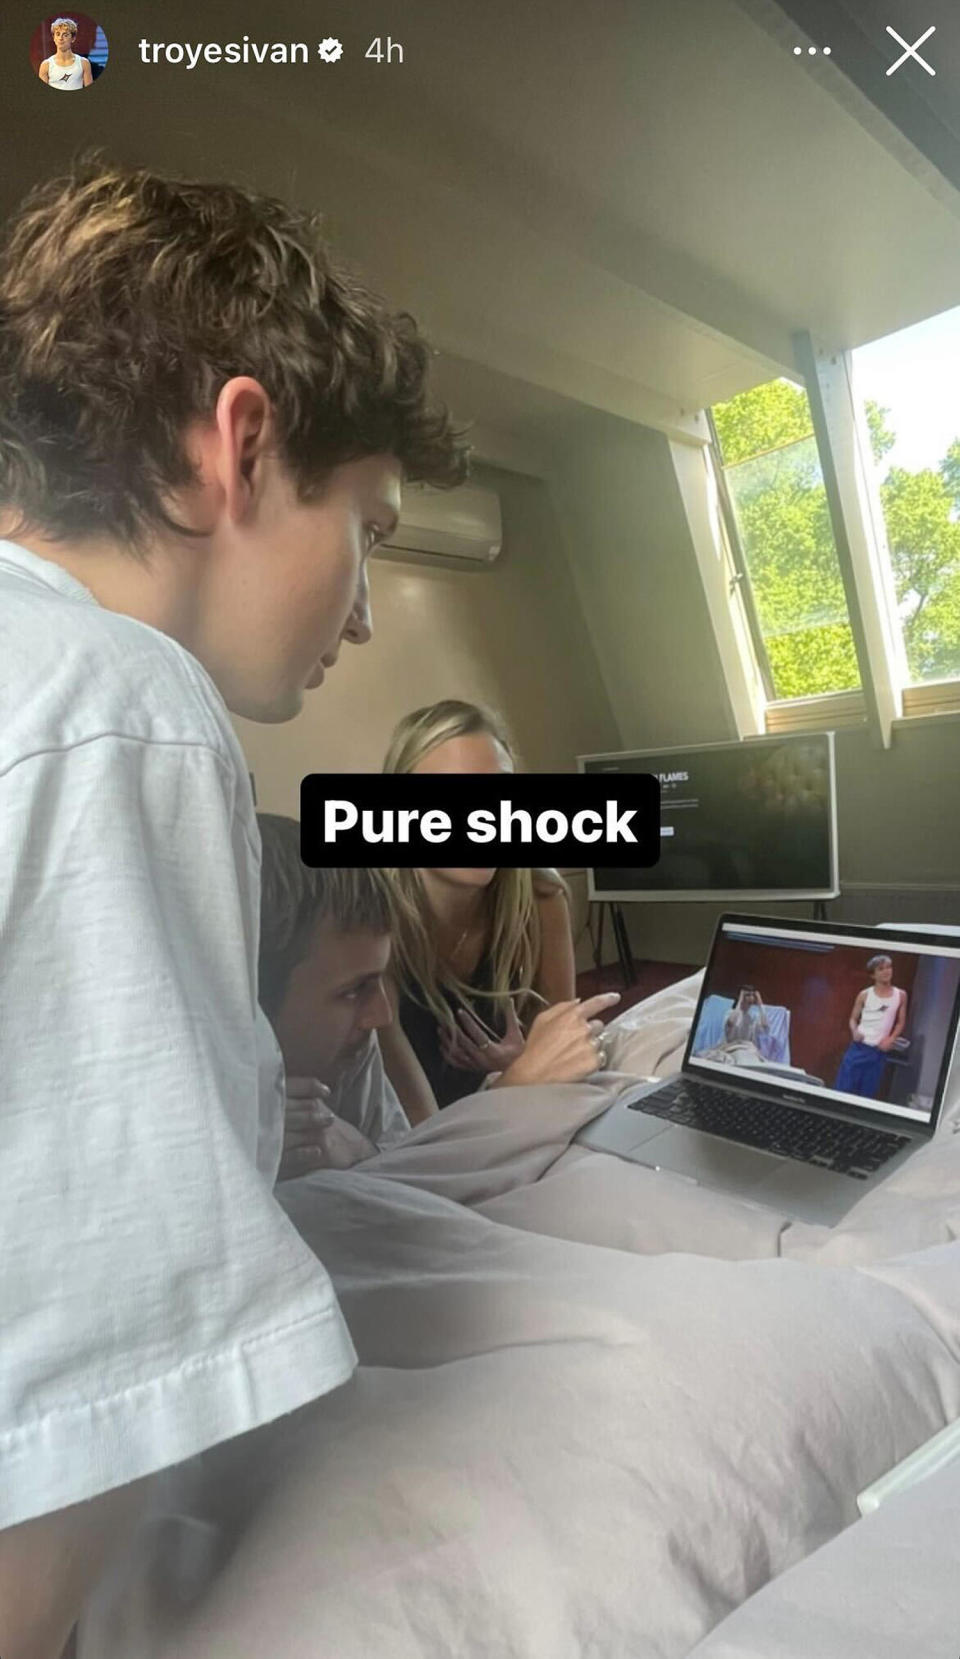 Troye Sivan shared his real-time reaction to the sketch on social media. (Troye Sivan / Instagram)